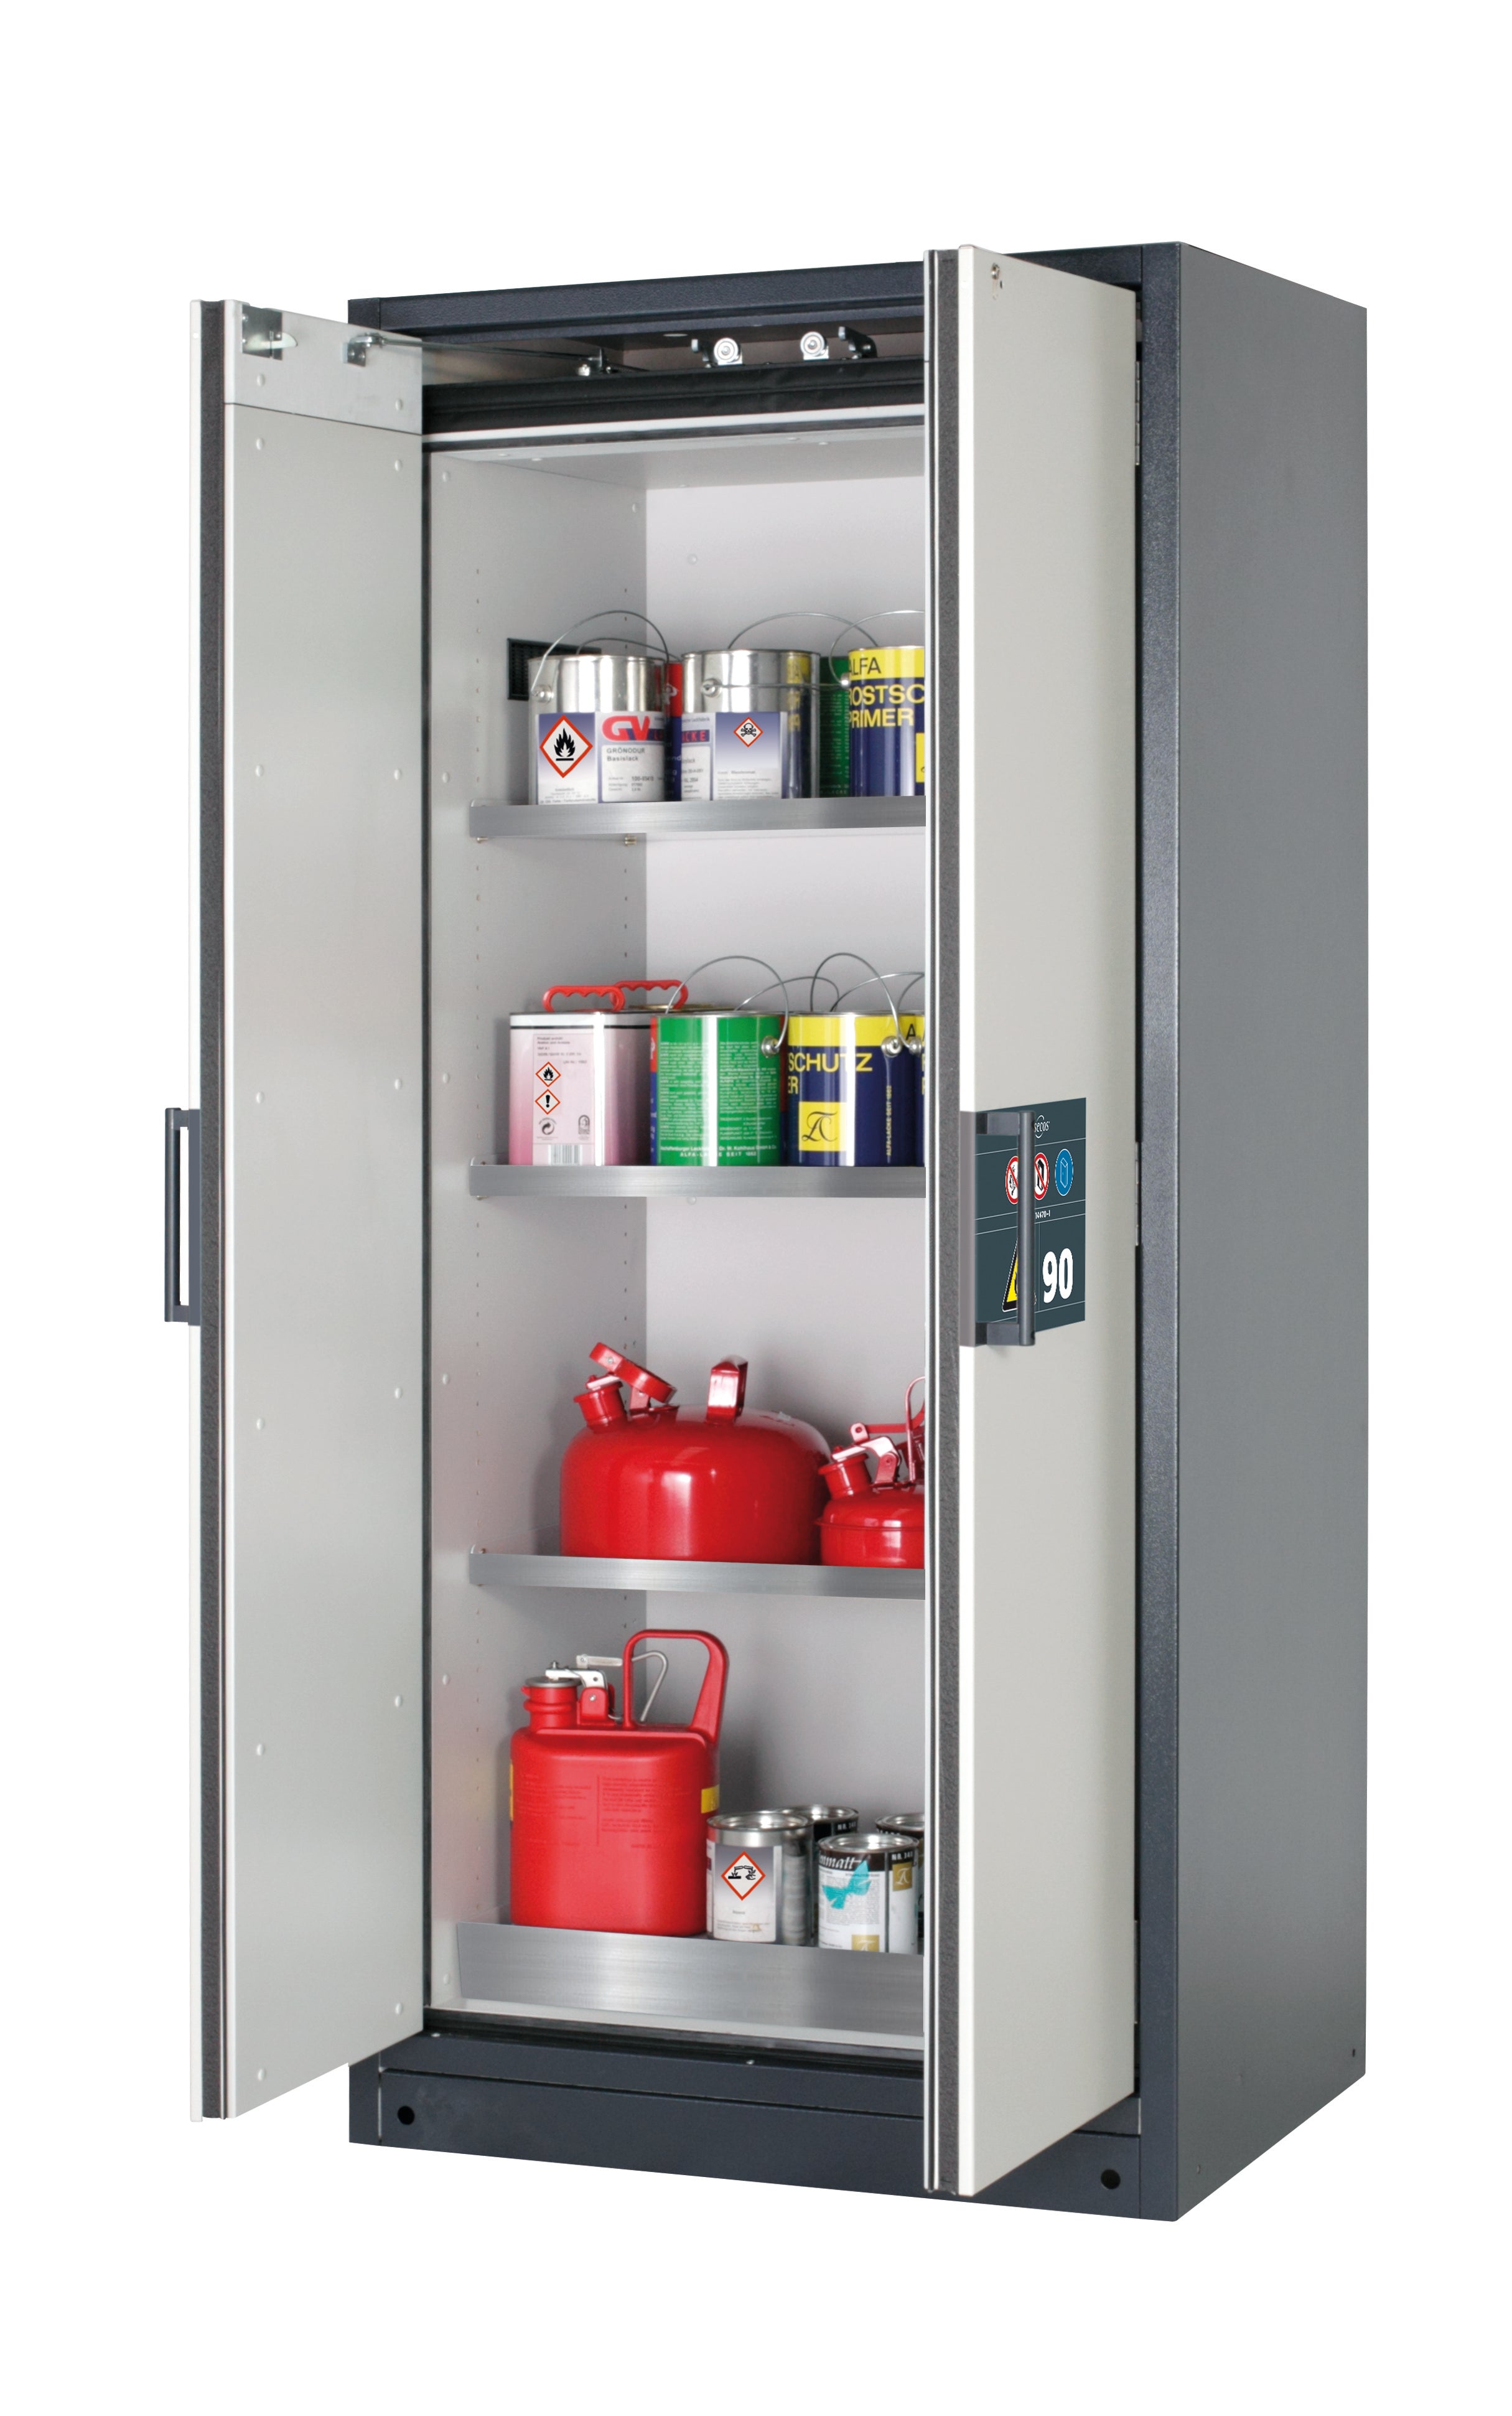 Type 90 safety storage cabinet Q-CLASSIC-90 model Q90.195.090 in light grey RAL 7035 with 3x shelf standard (stainless steel 1.4301),